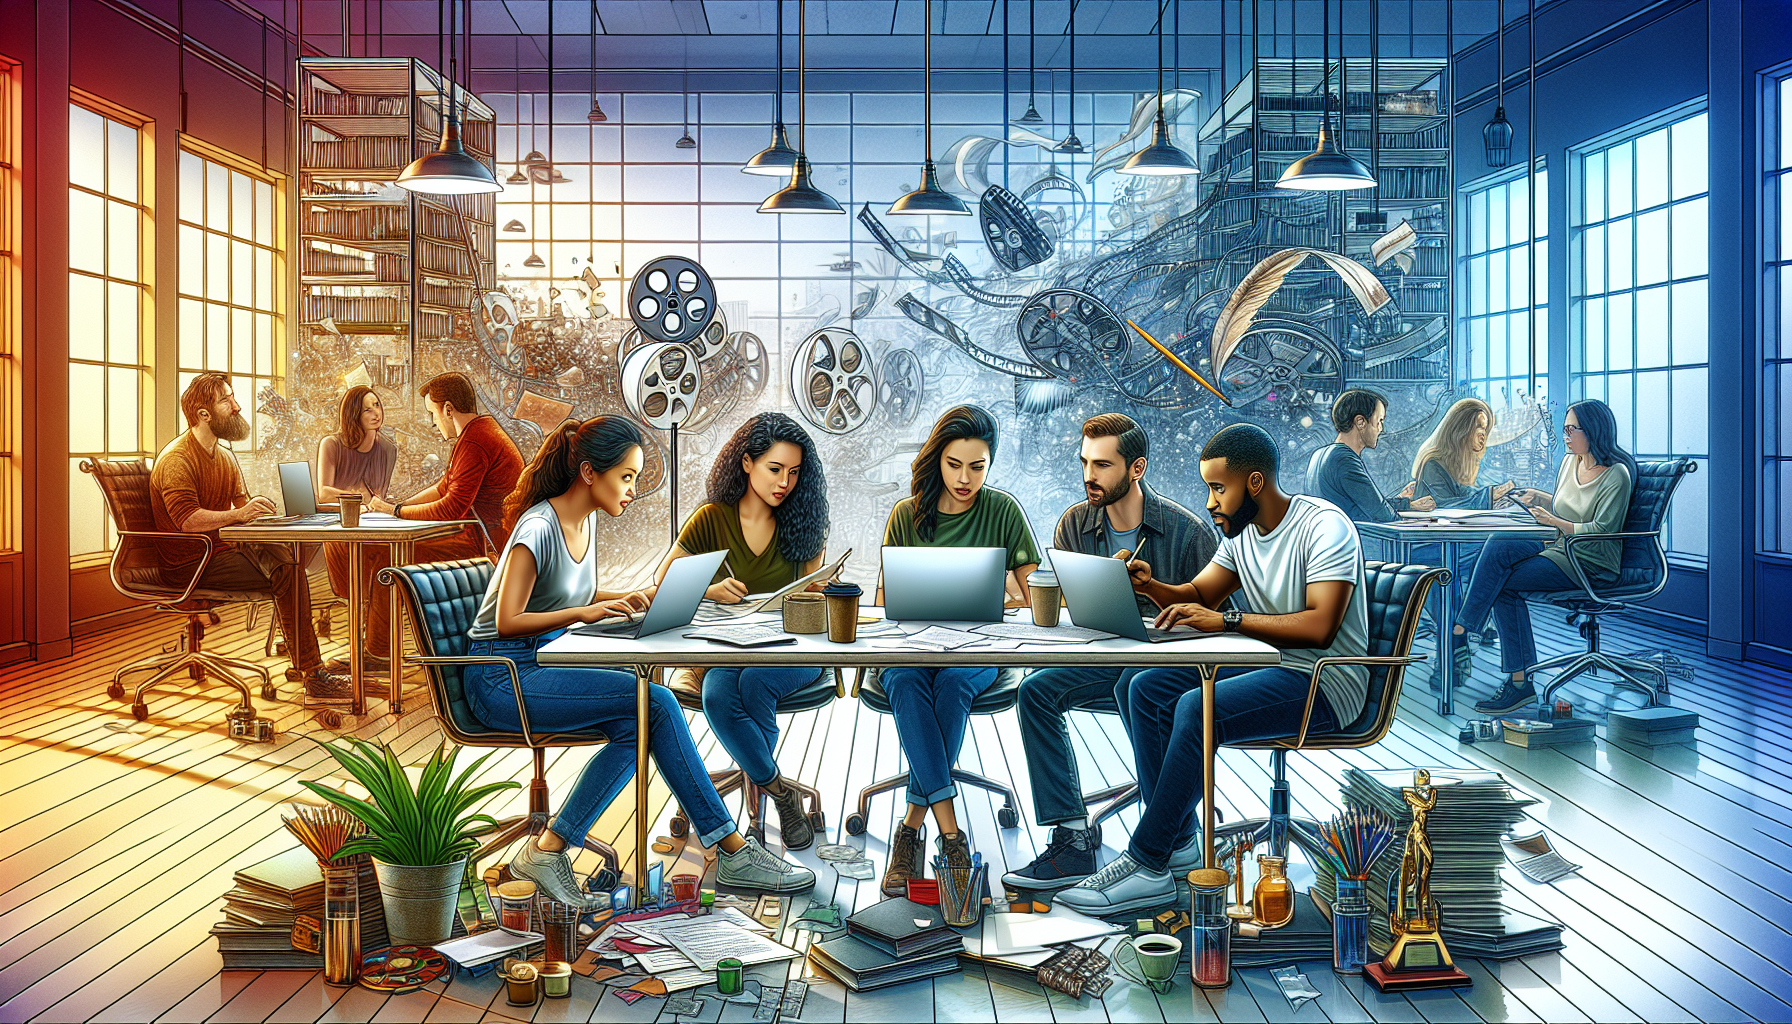 Create a digital artwork of a diverse group of screenwriters in a contemporary, bright studio, brainstorming around a large, cluttered table filled with scripts, laptops, and coffee cups. The backgrou